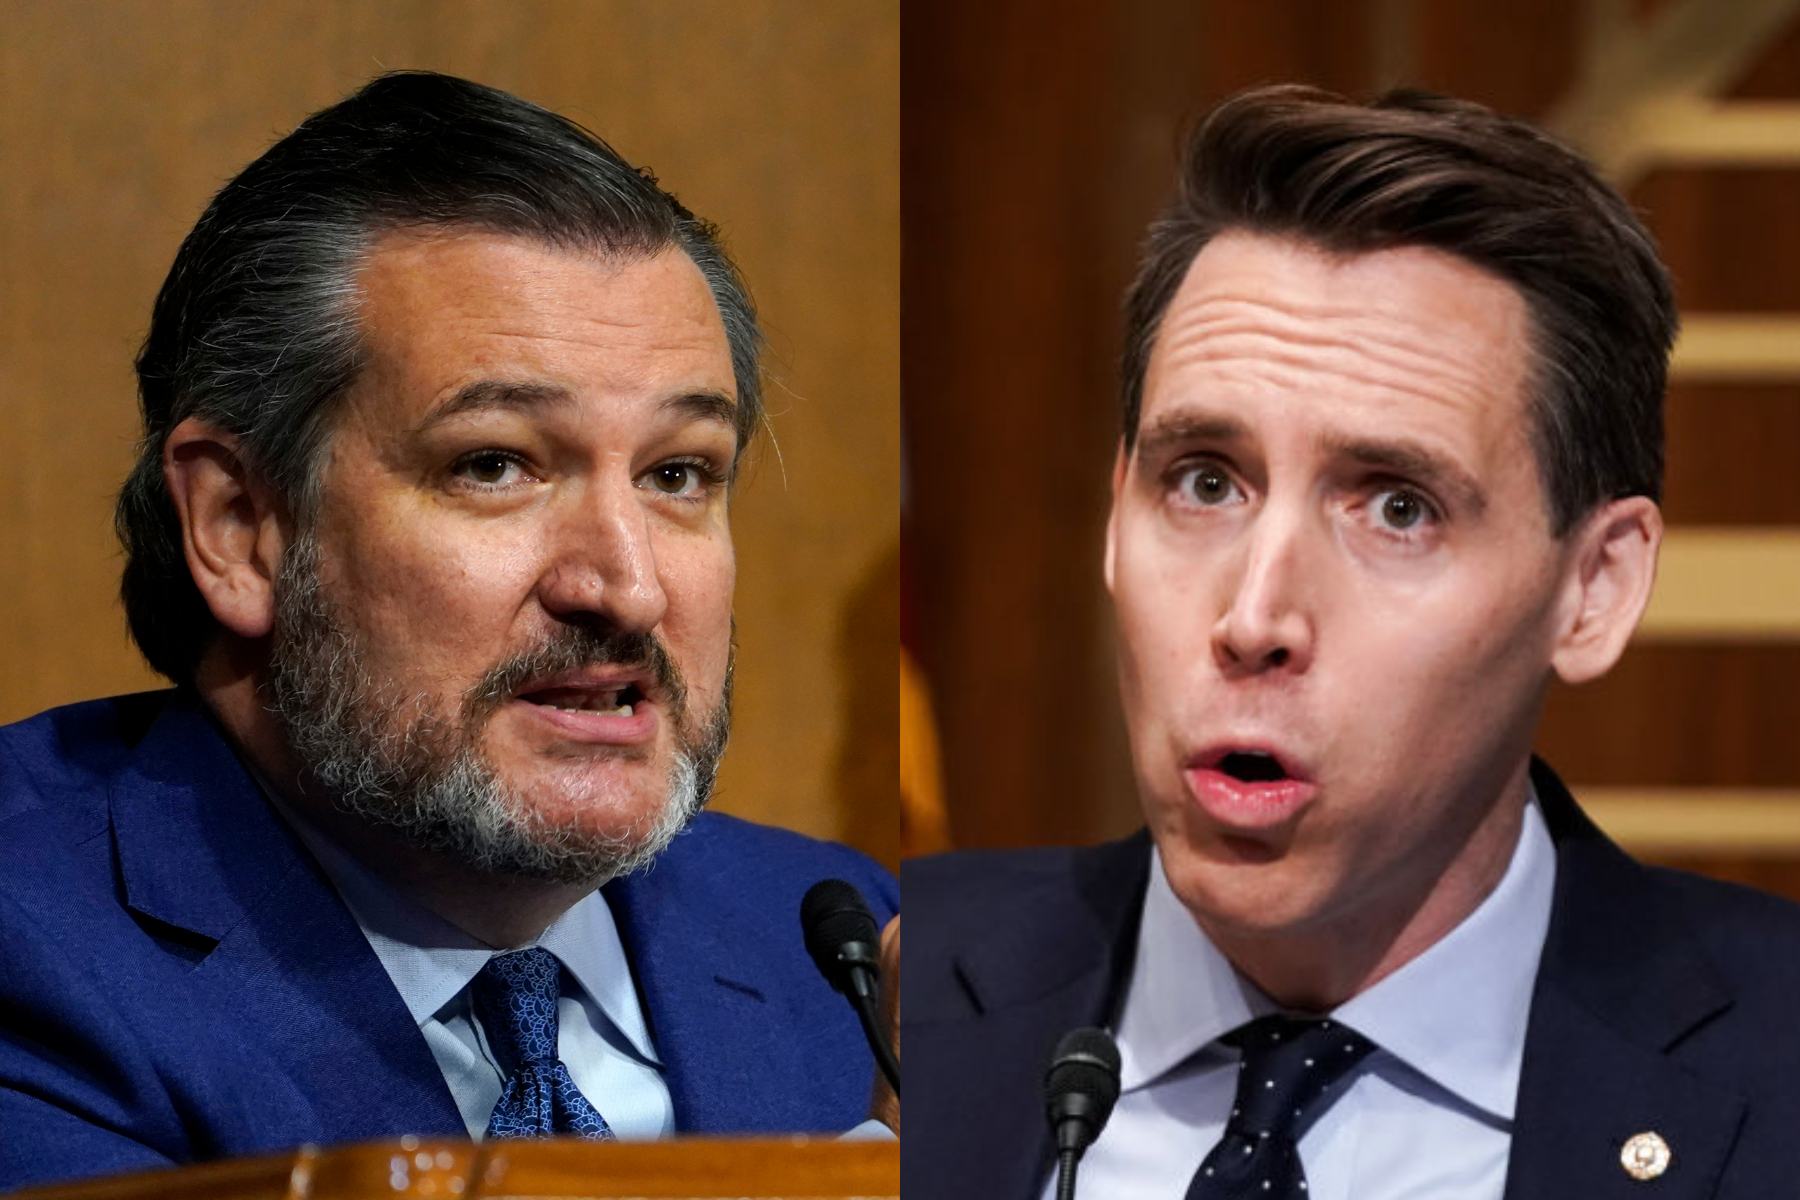 Video that Josh Hawley and Ted Cruz Expulsion urgently viewed 2 million times